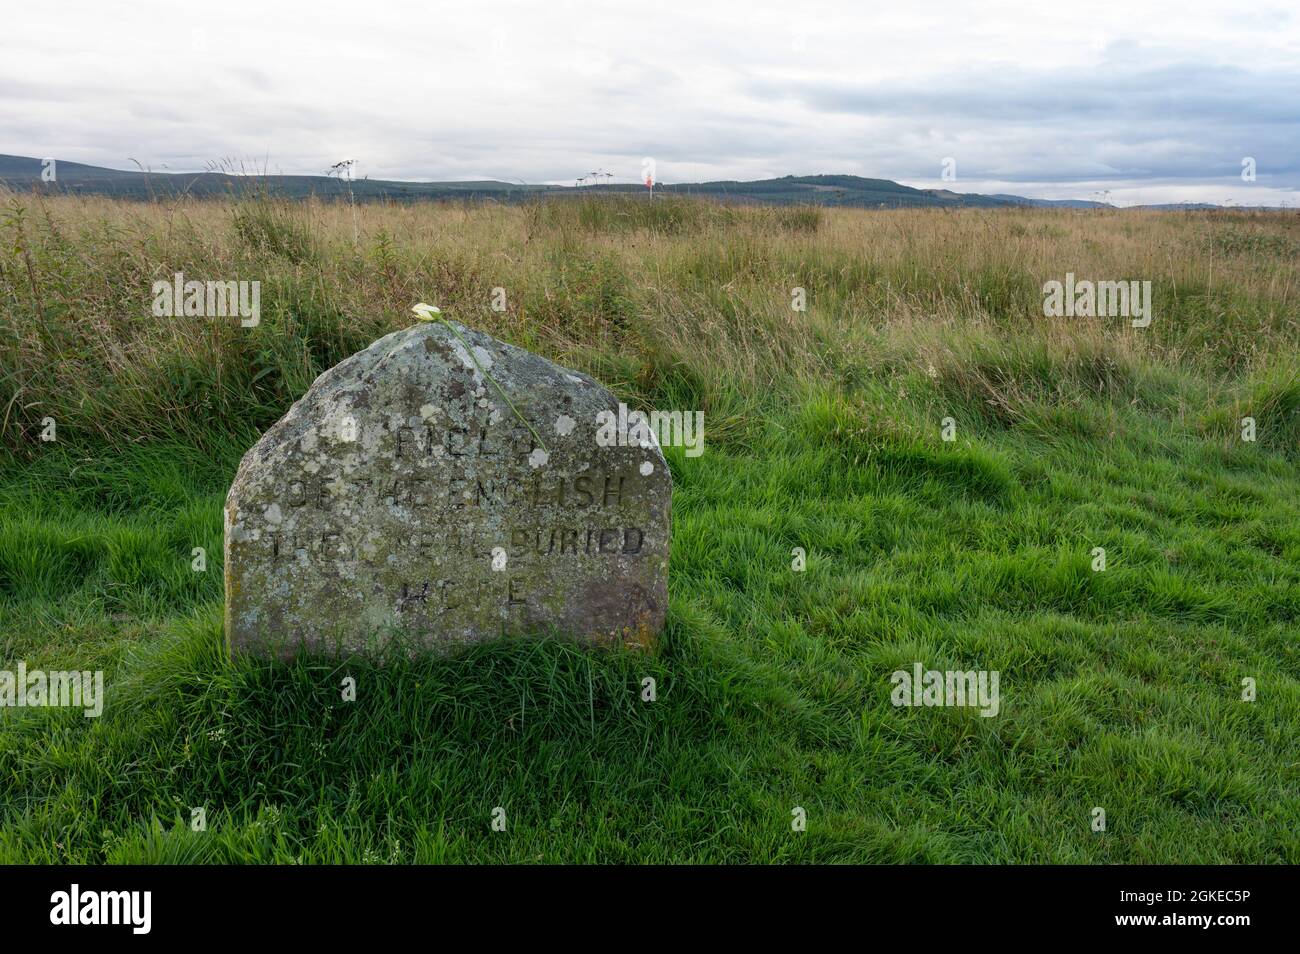 Headstone at Culloden battlefield in Scotland: Field of the English they were buried here. Wilting white rose placed on top of headstone. Stock Photo